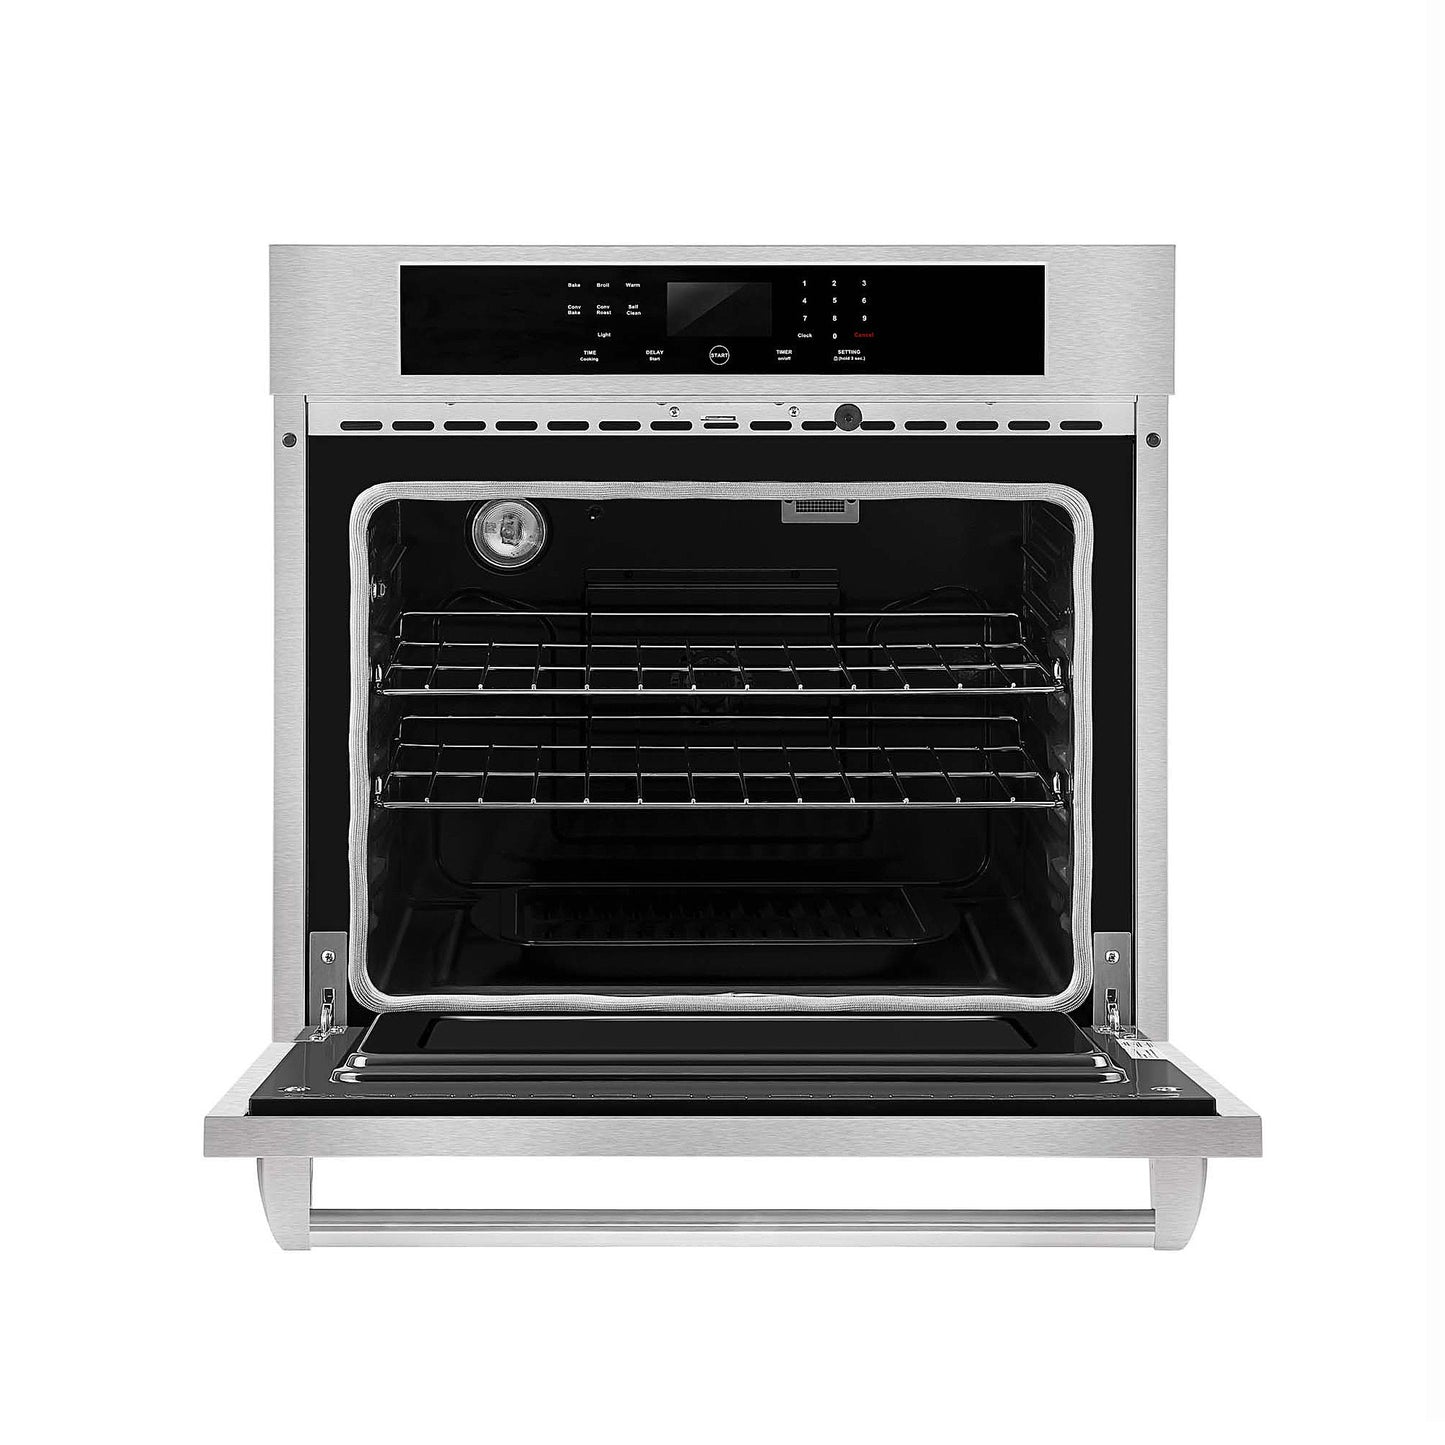 Empava 30WO03 30 in. Built-in Electric Single Wall Oven